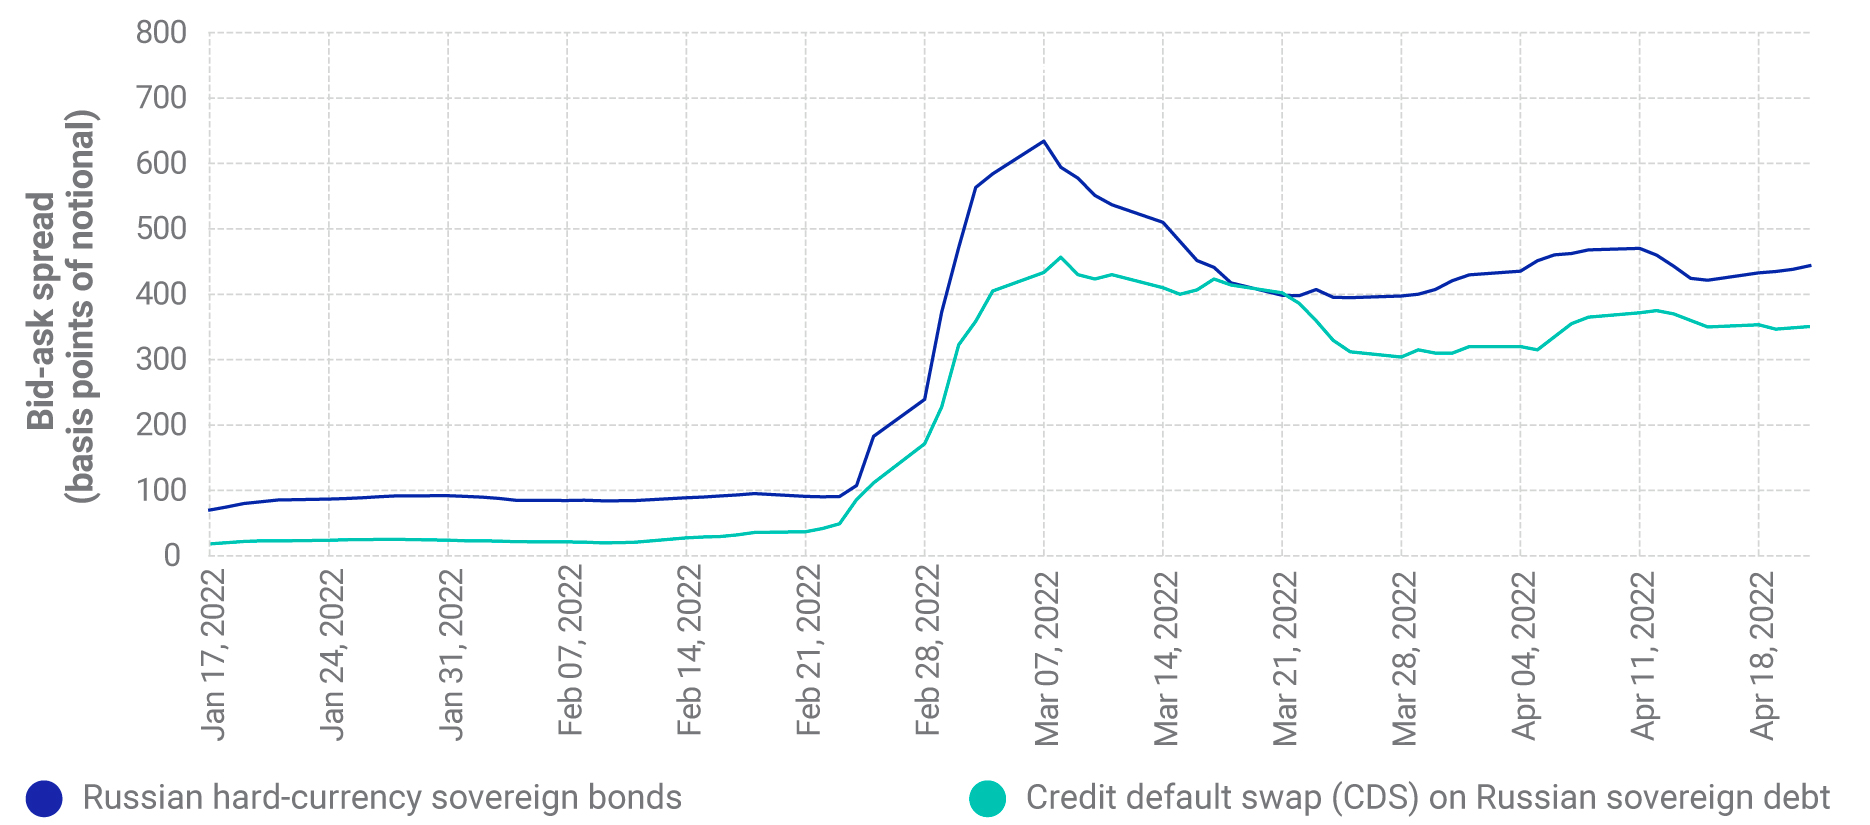 Bid-ask spread of Russian sovereign bonds and CDS increased